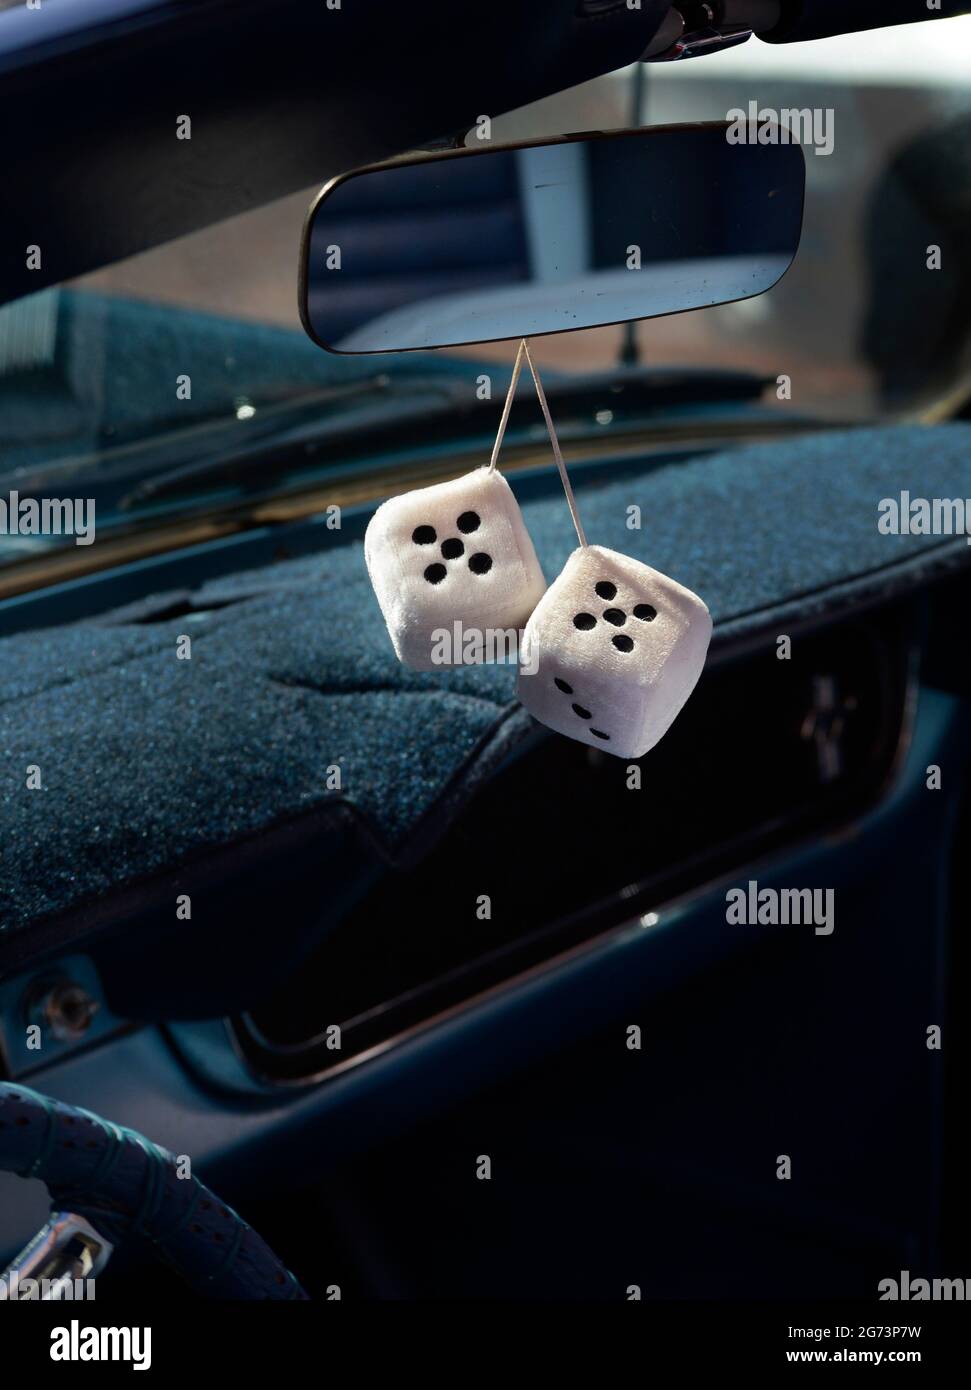 [4 Dice 2 Pack] Retro Hanging Dice for Car Mirror Black and White  (Nostalgic 80's Fuzzy Car Dice for Mirror) Plush Car Accessories (Set of 2)